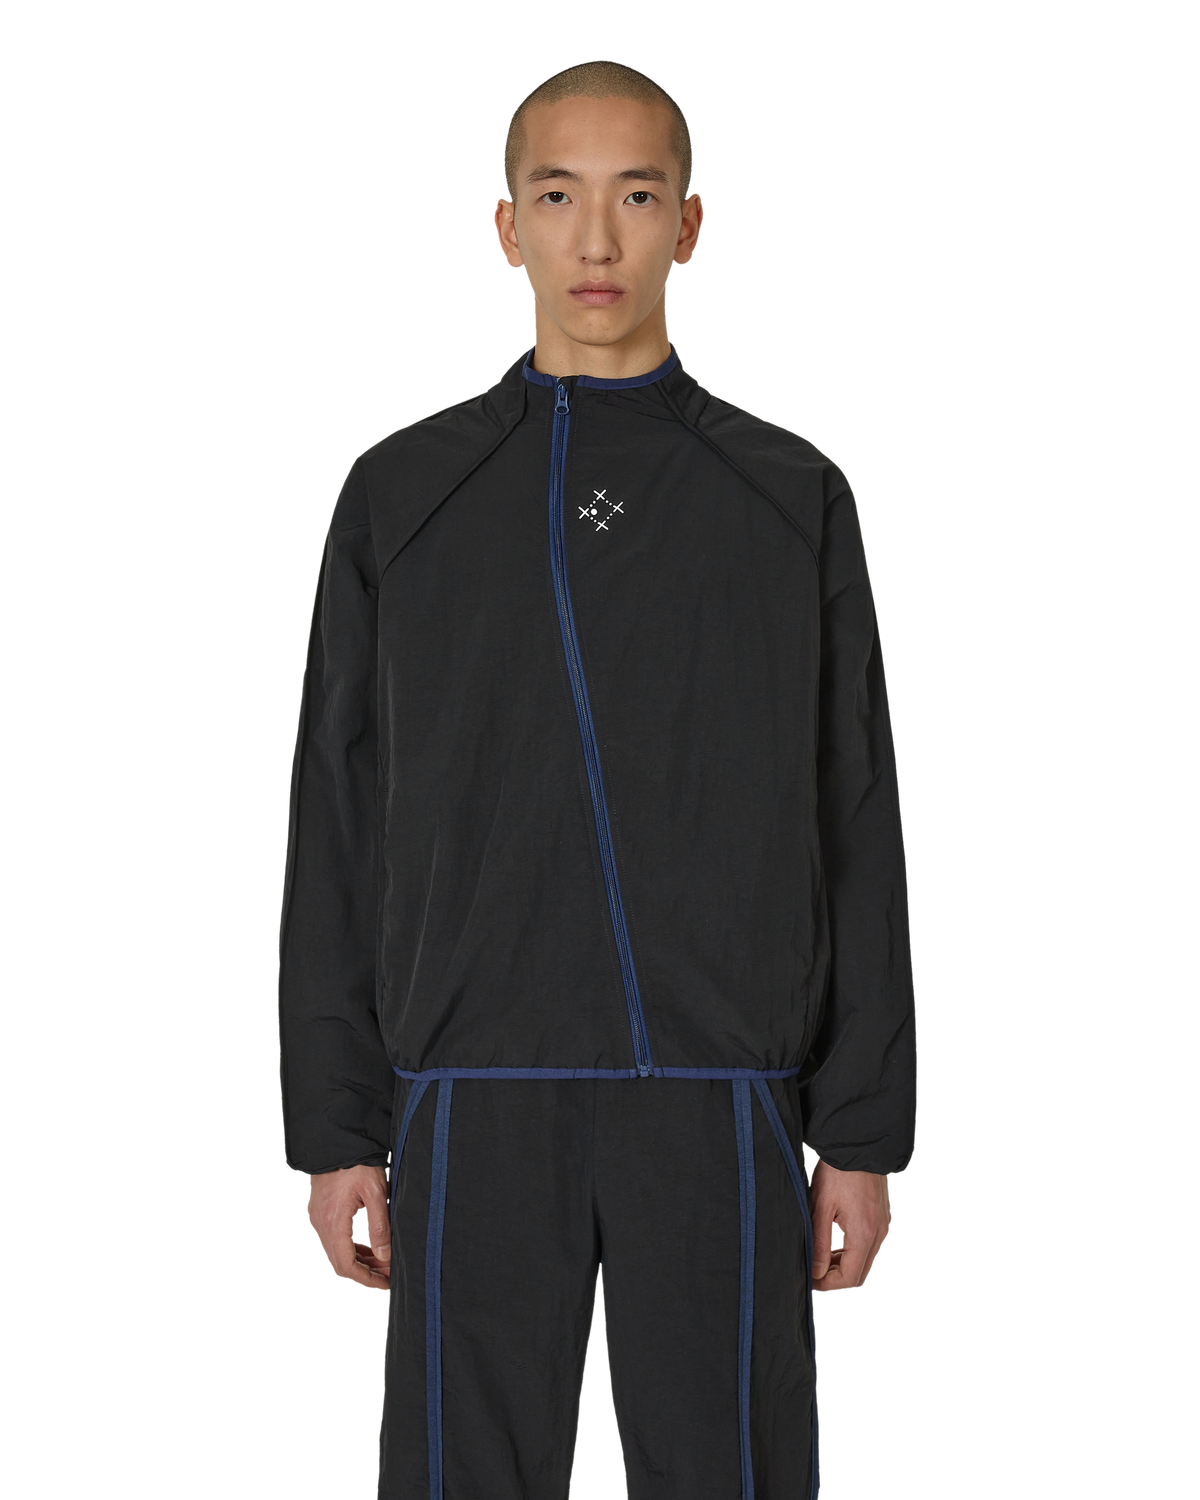 _J.L - A.L_ _J.L-A.L_ x Sound Sports Windbreaker J297464-M-Black front